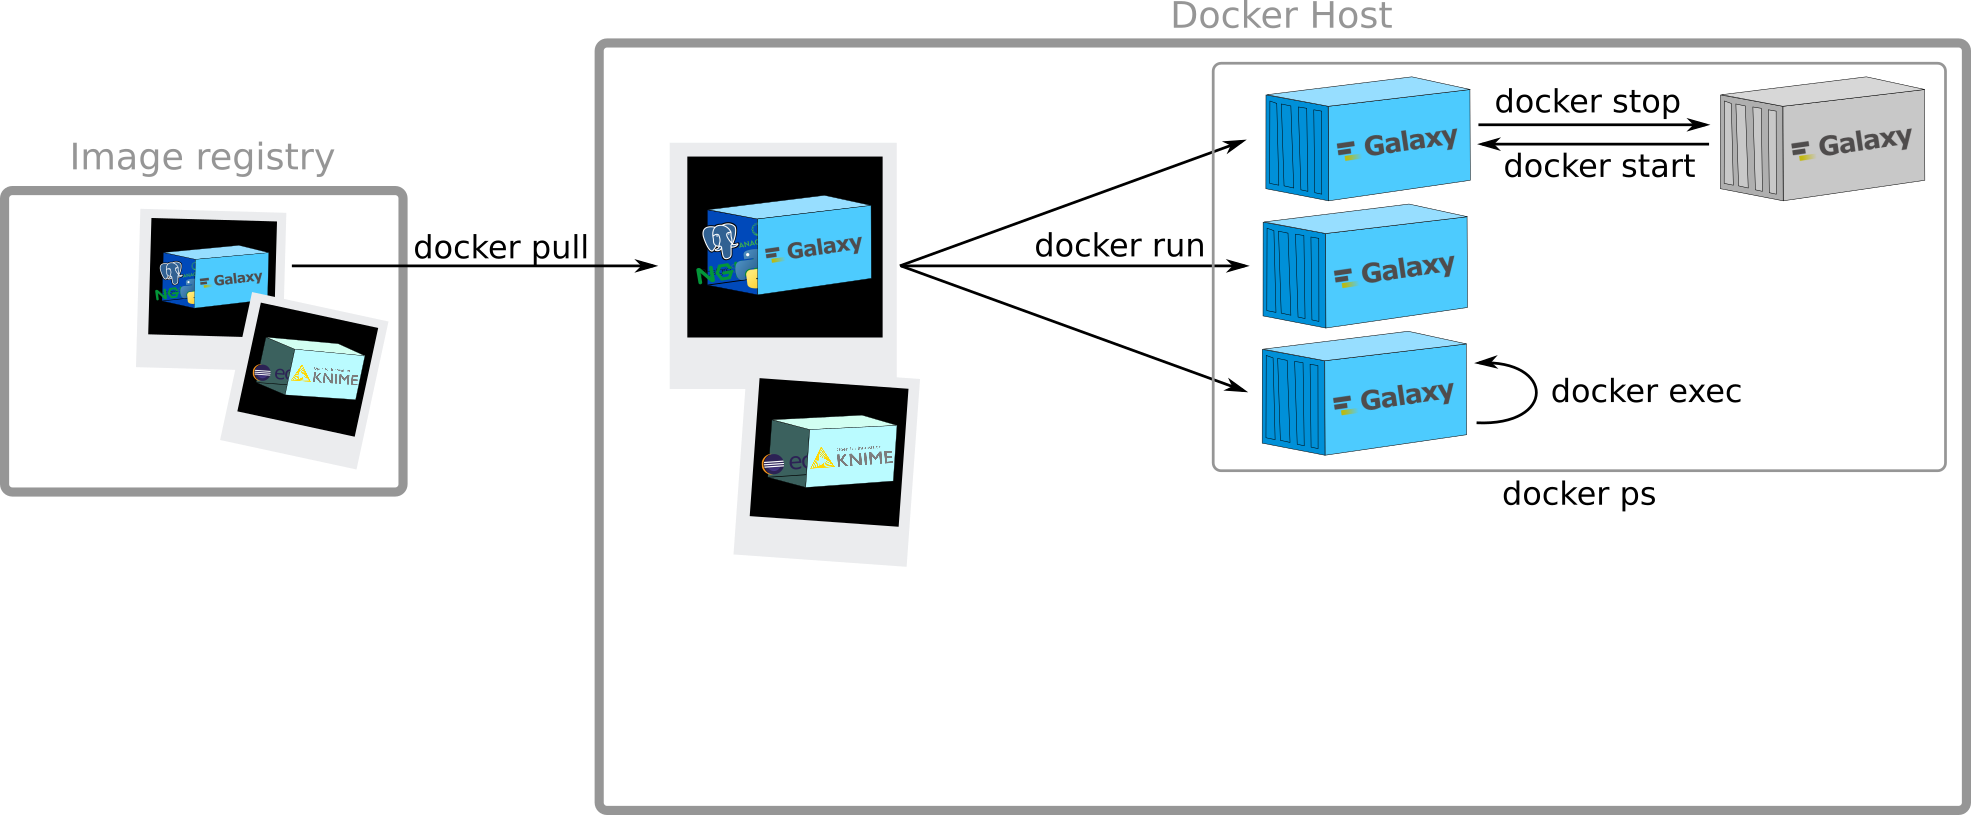 docker ps shows a box around the previous graphic and shows running and stopped container.